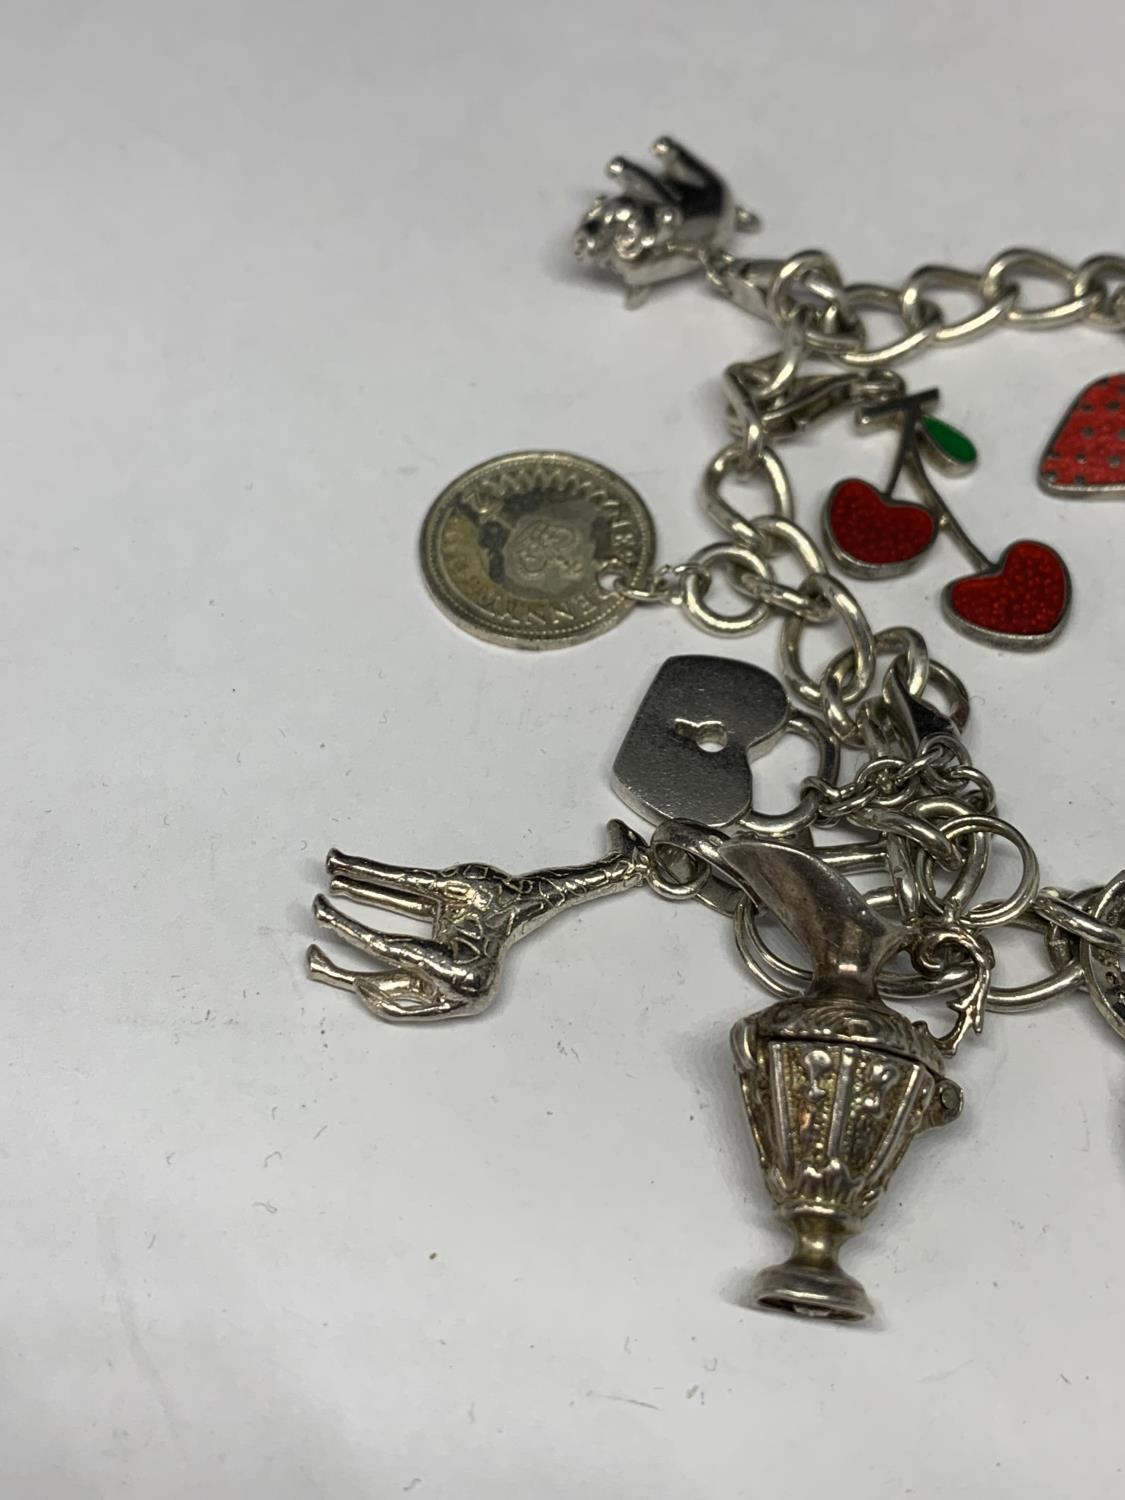 A HEAVY SILVER CHARM BRACELET WITH THIRTEEN CHARMS TO INCLUDE A STRAWBERRY, CHERRIES, DOVE ETC - Image 2 of 4